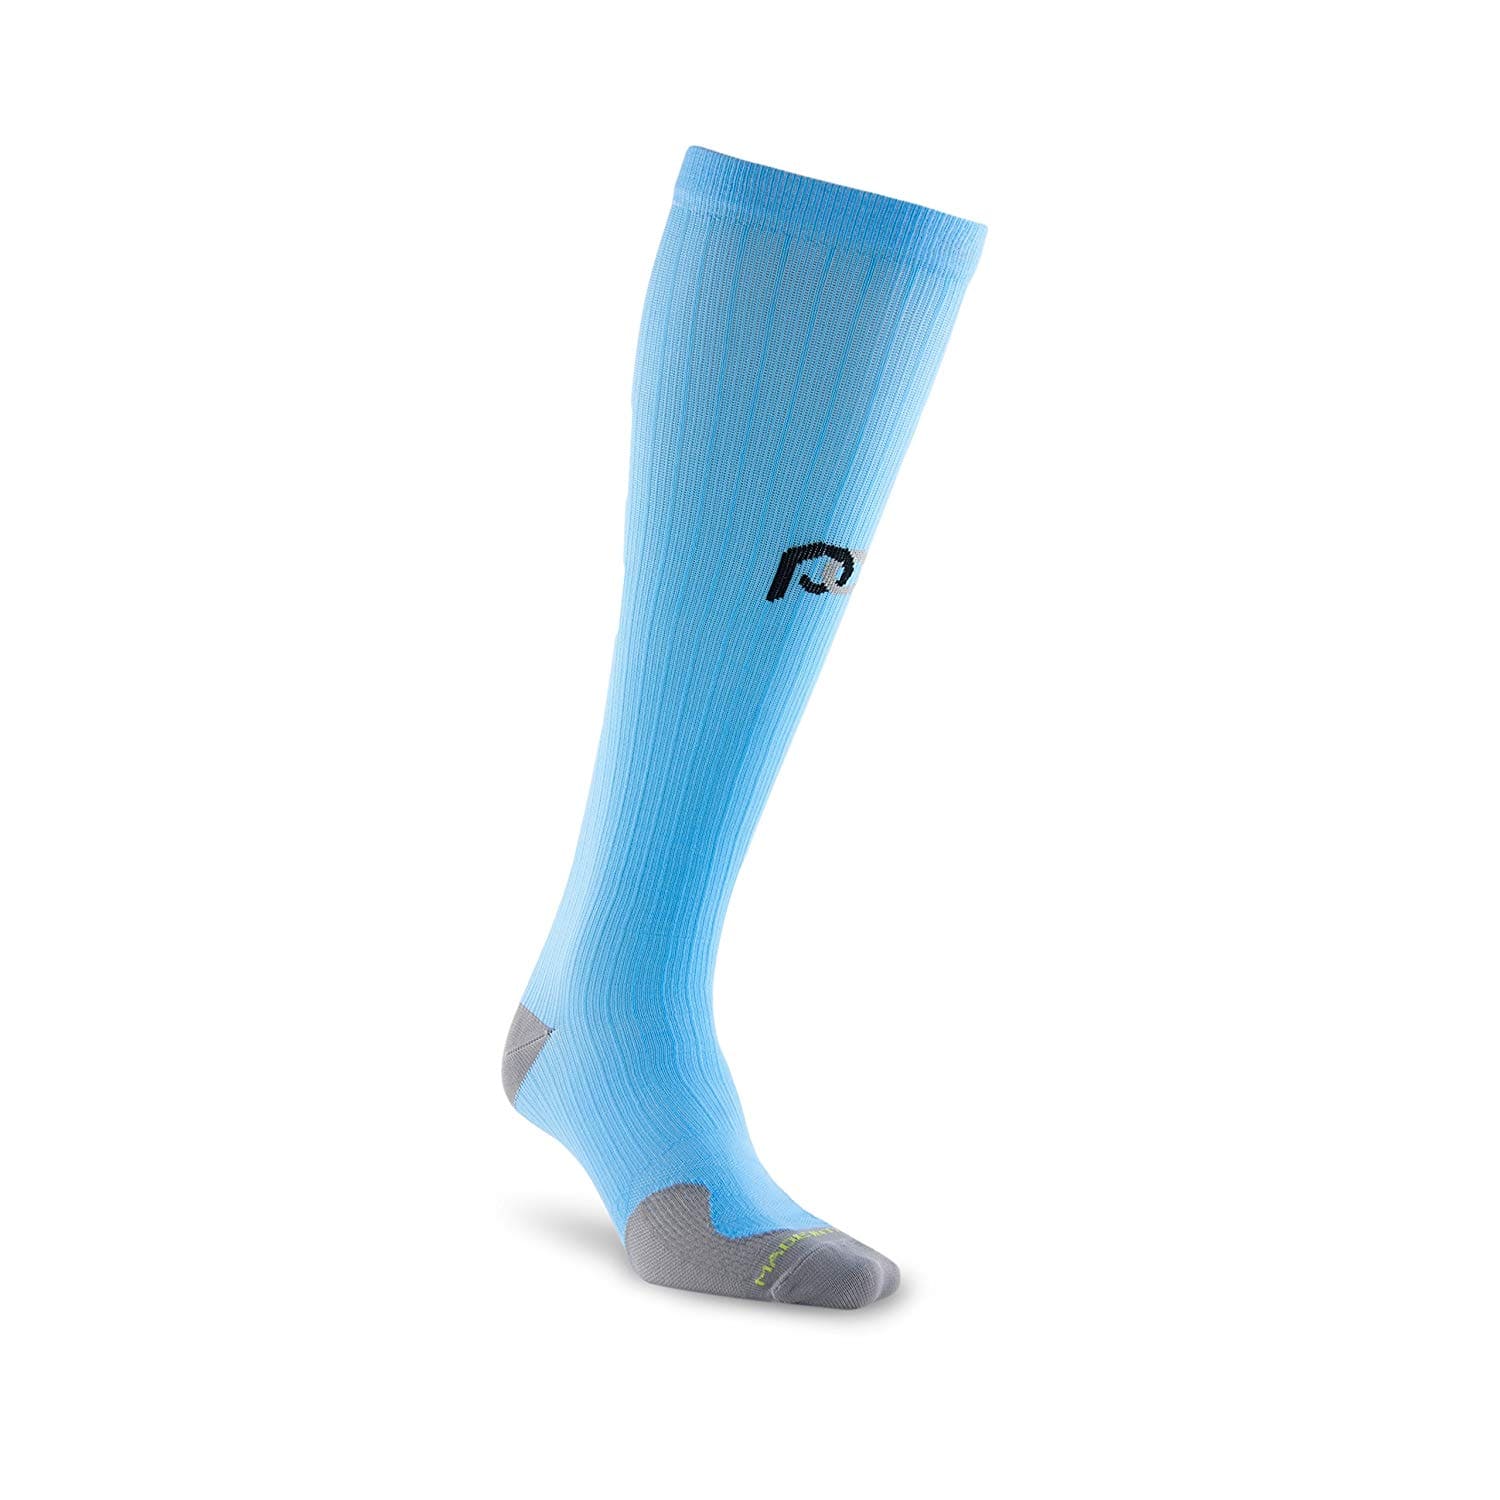 Pro Compression Socks Review | Analyze of 3 Different Sock Types